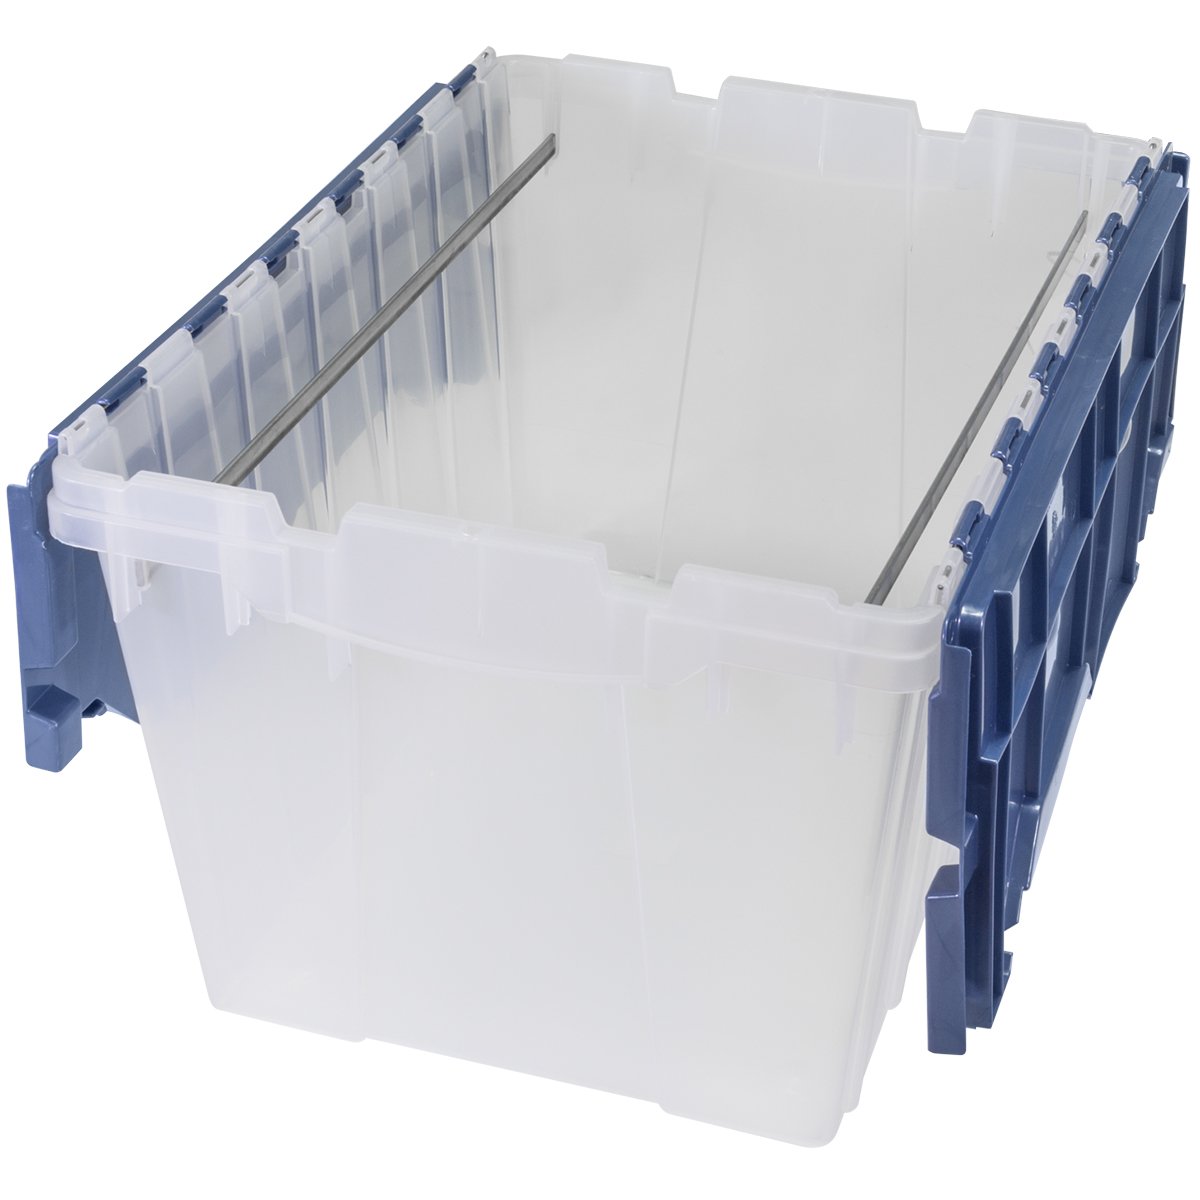 Book Cover Akro-Mils 12 Gallon KeepBox File Box Plastic Stackable Storage Container with Hinged Attached Lid and Rails for Hanging File Folders, 21-Inch L x 15-Inch W x 12-Inch H, Clear/Blue